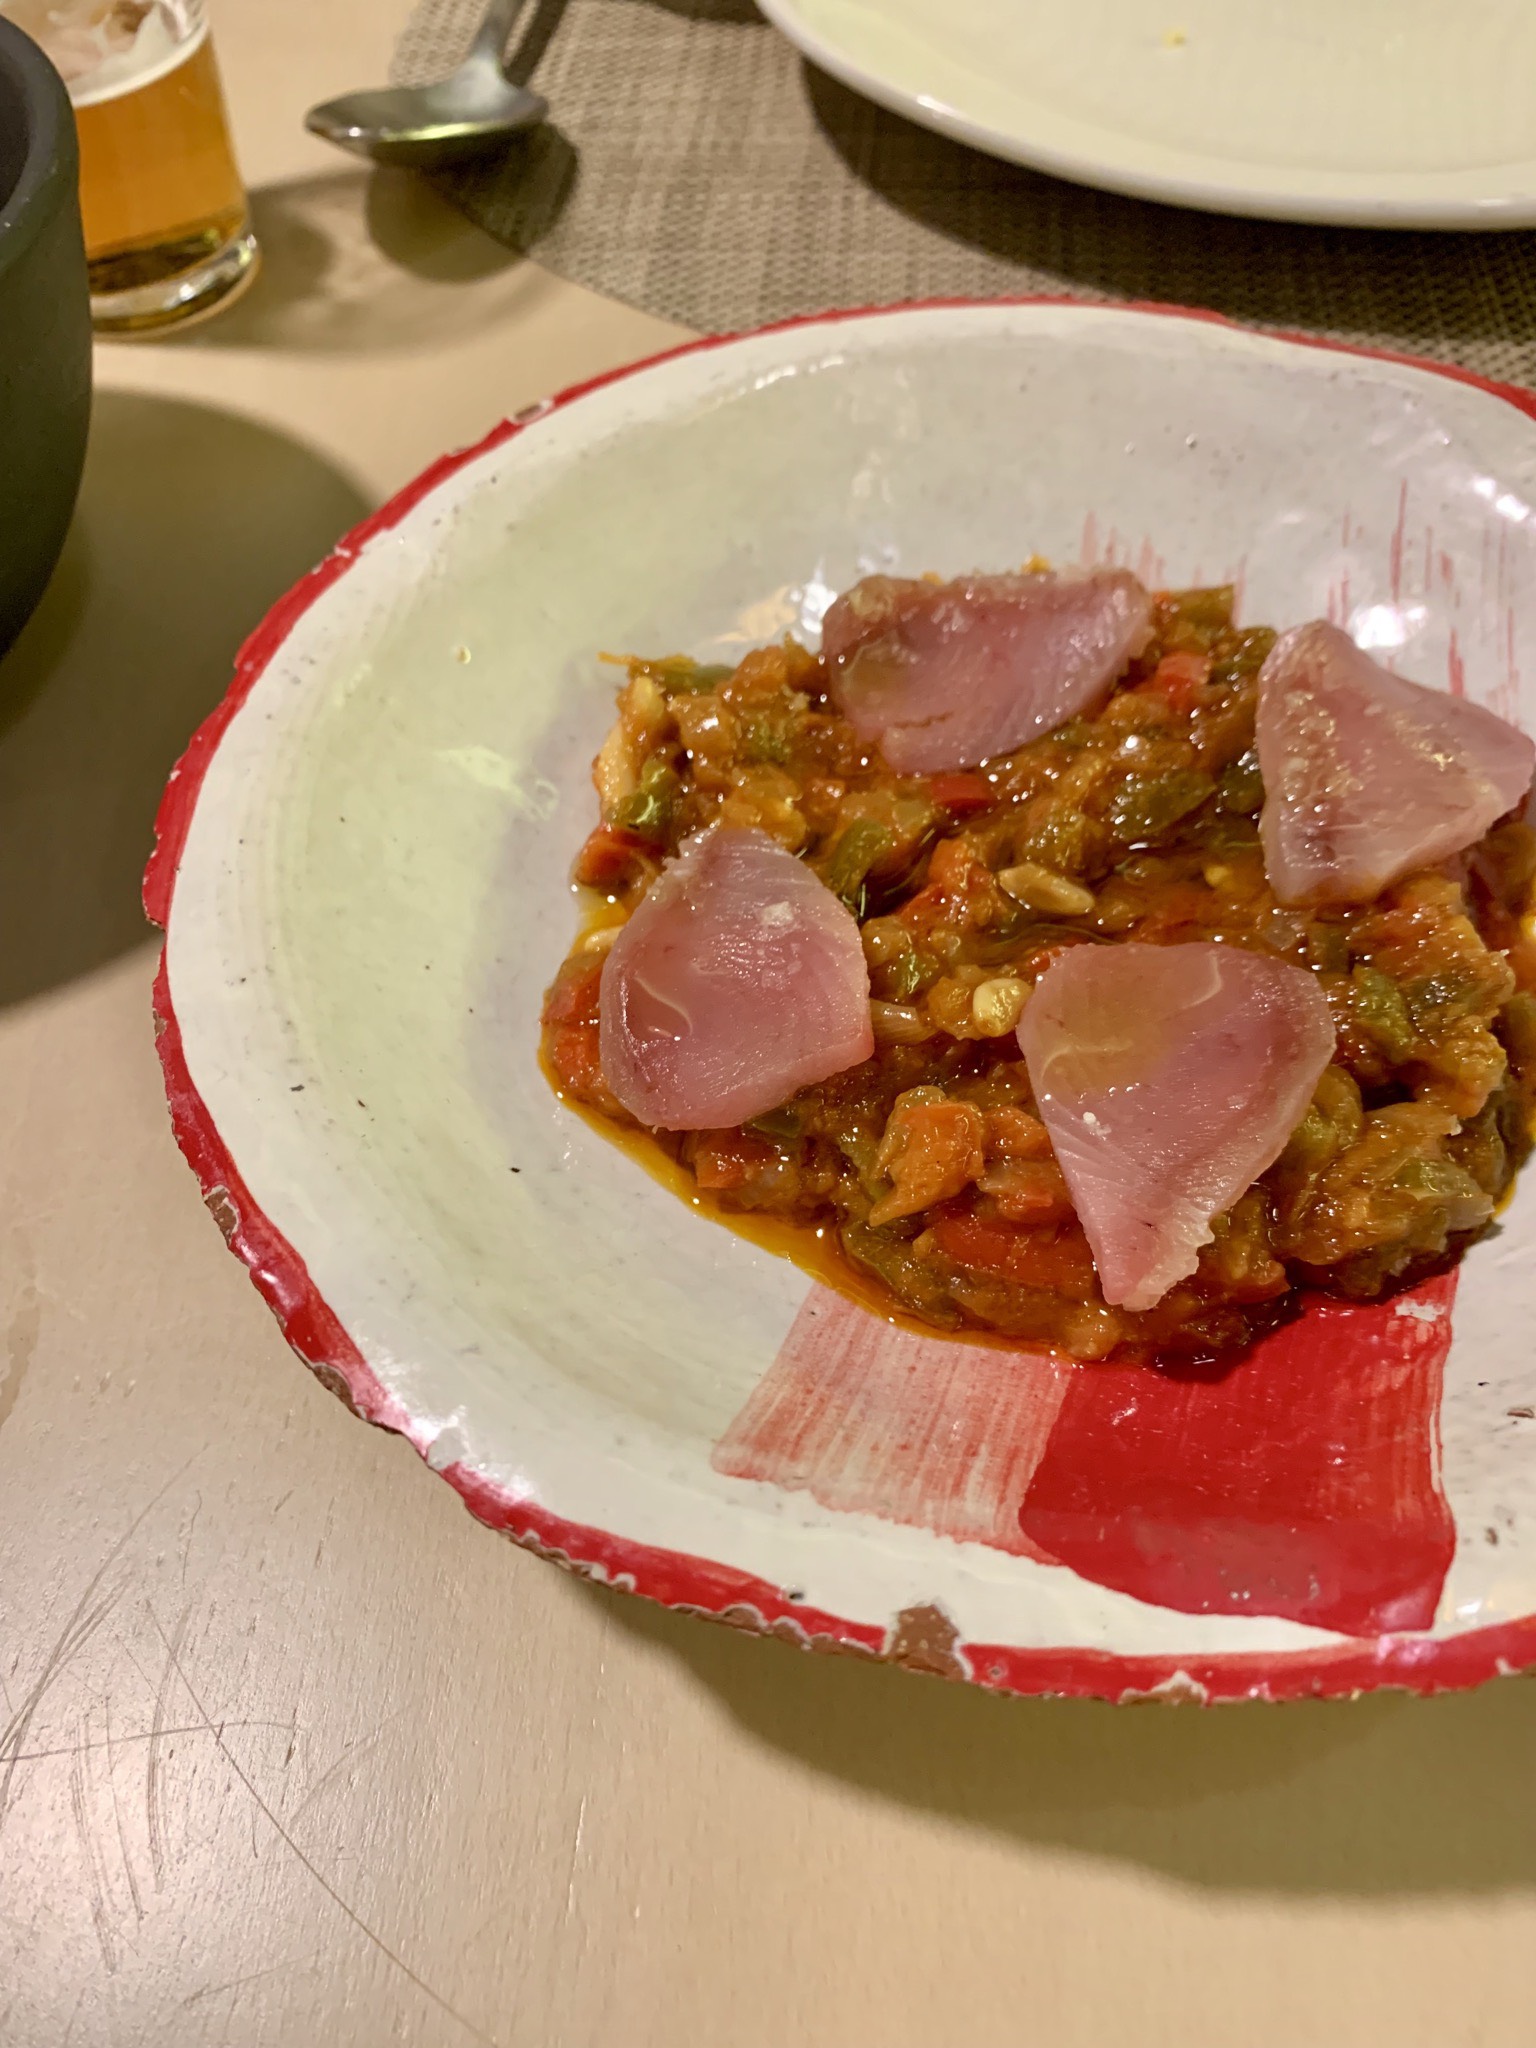 Titaina from Vicente Patiño's Sucar is a traditional dish from the El Cabañal district made with tomatoes and pinñones